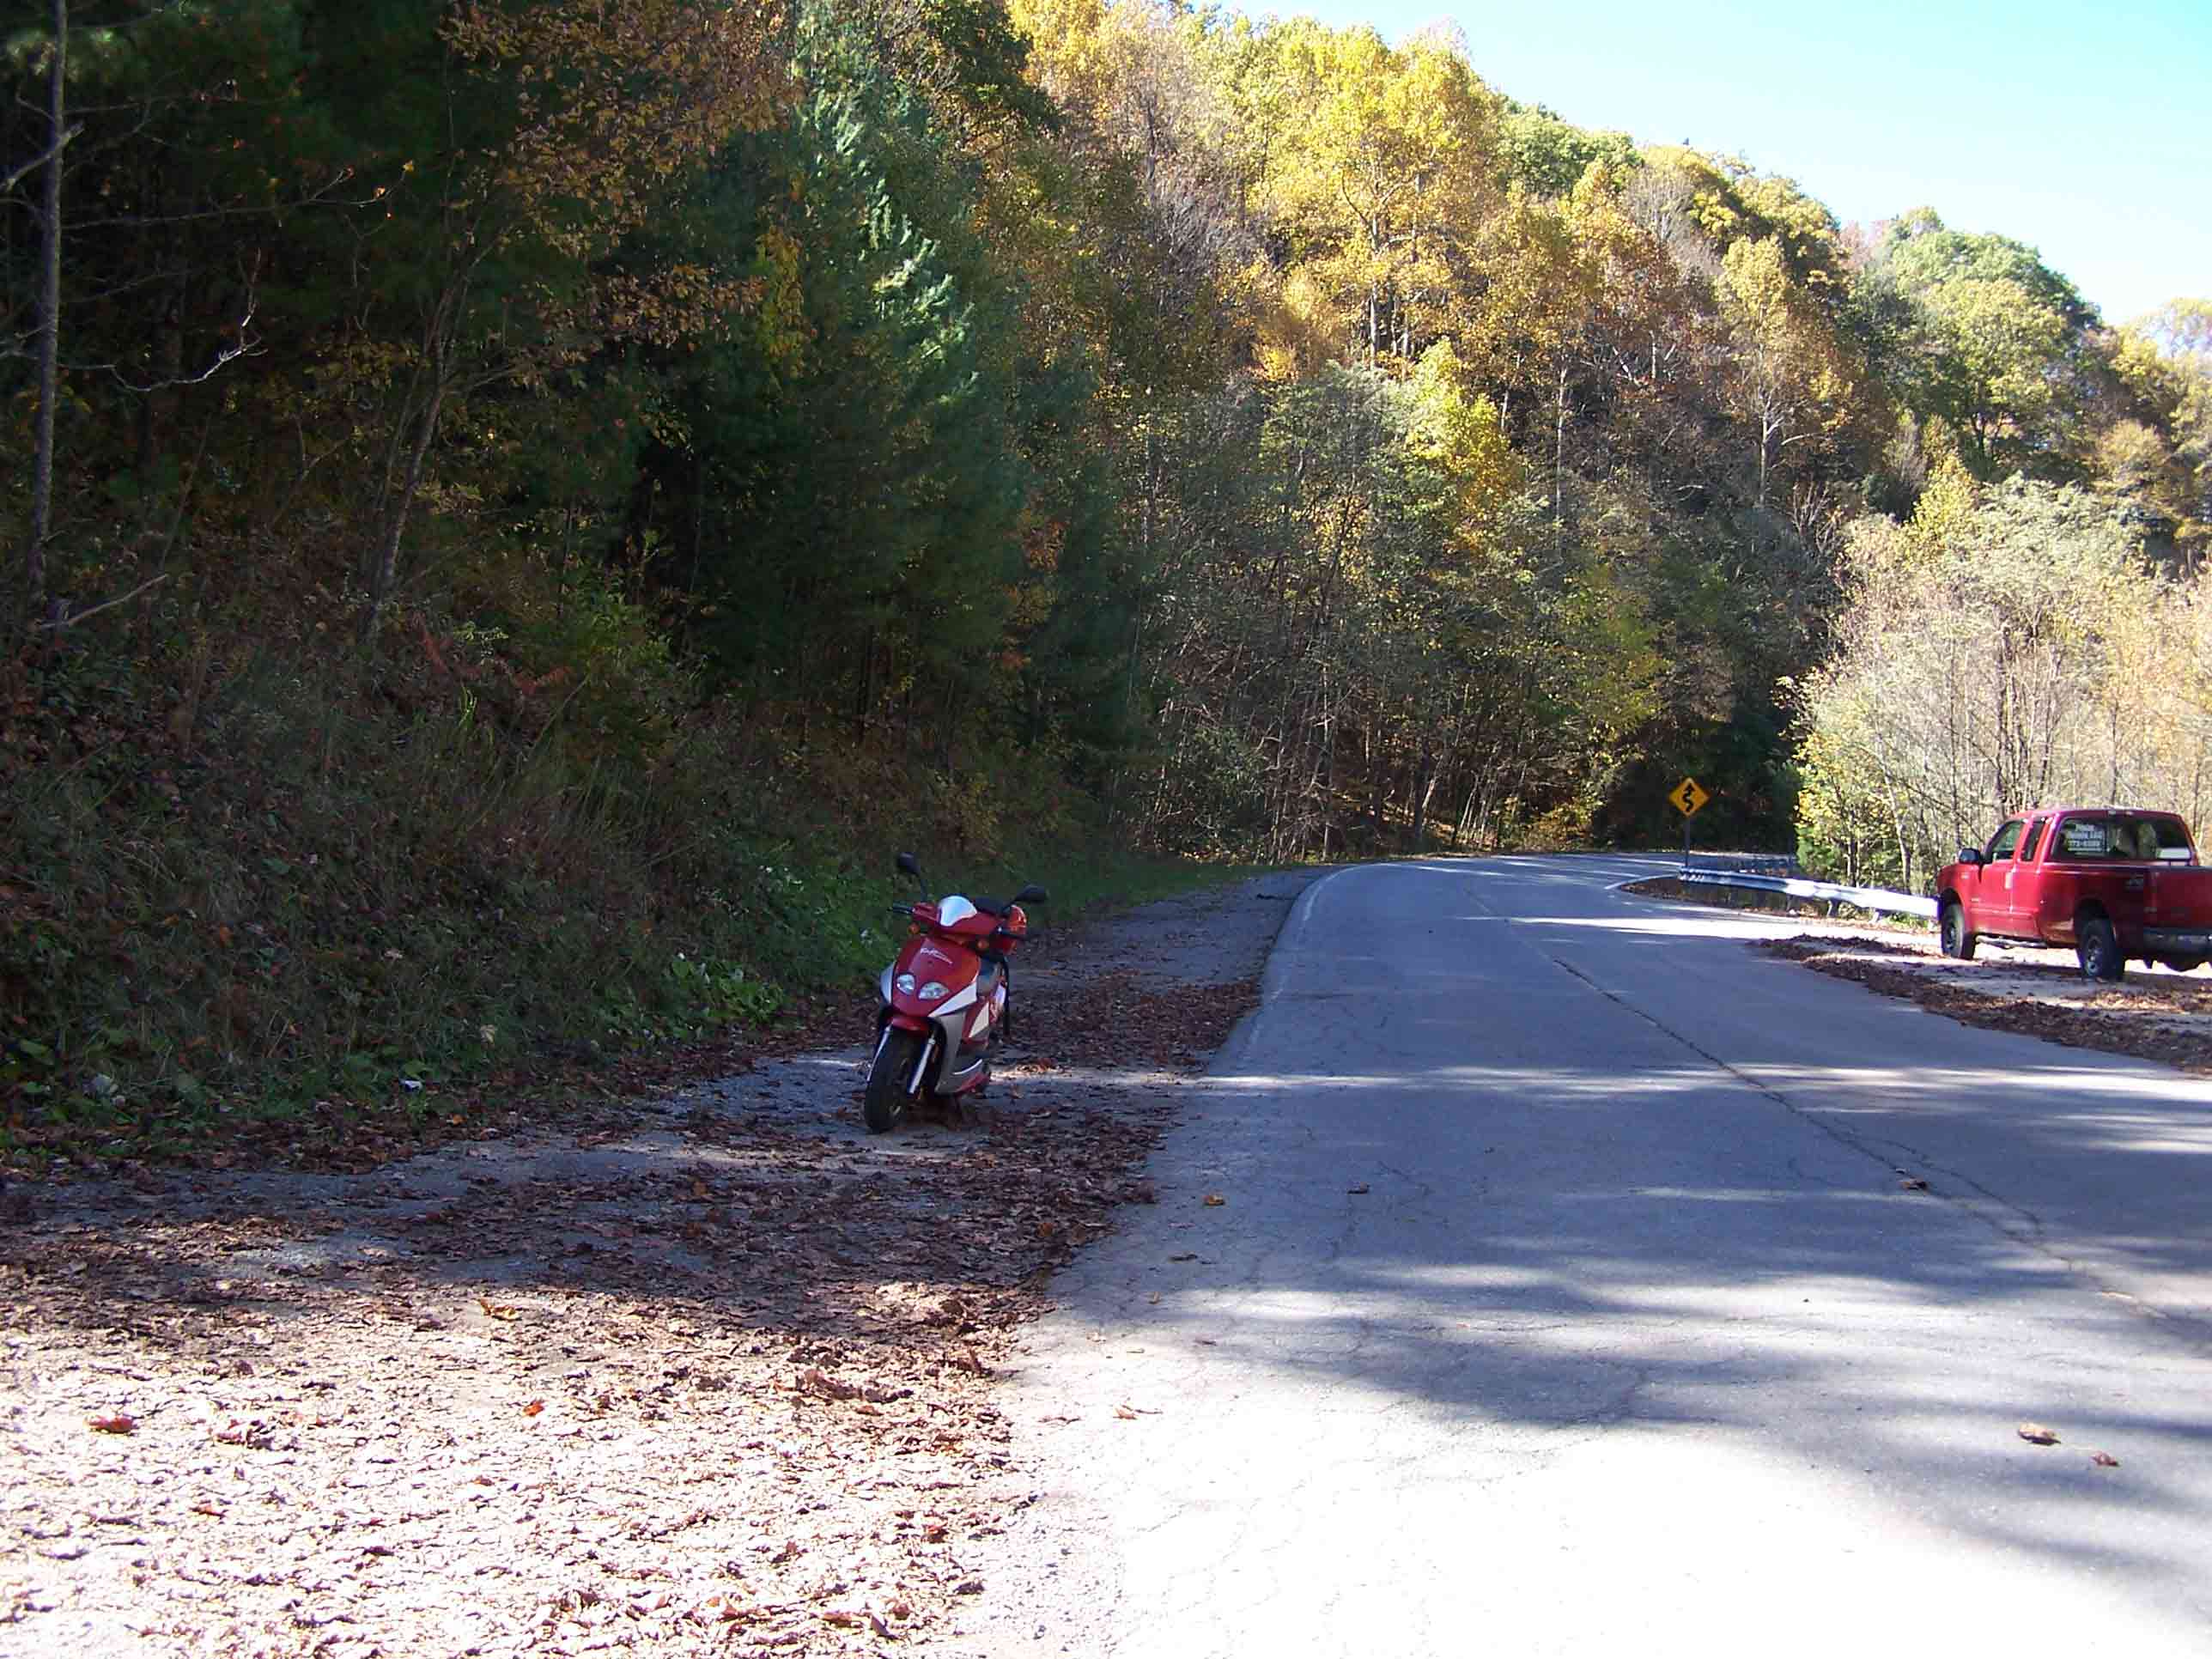 mm 11.8 - Parking along TN Route 395 at Indian Grave Gap. Courtesy at@rohland.org